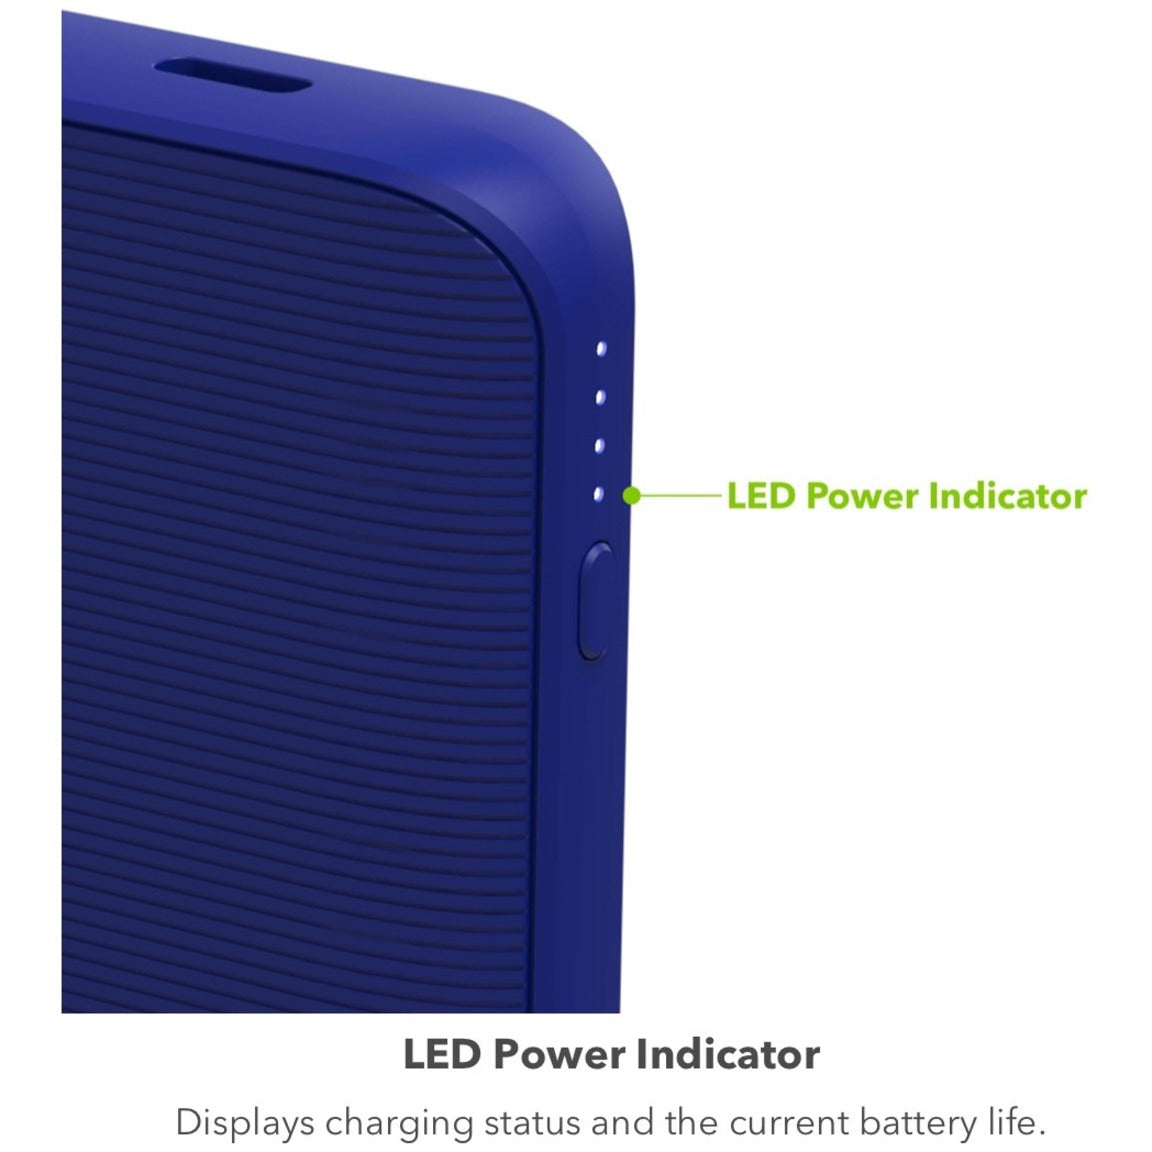 mophie power boost 10K mAh Portable battery USB-A and USB-C inputs - Cobalt